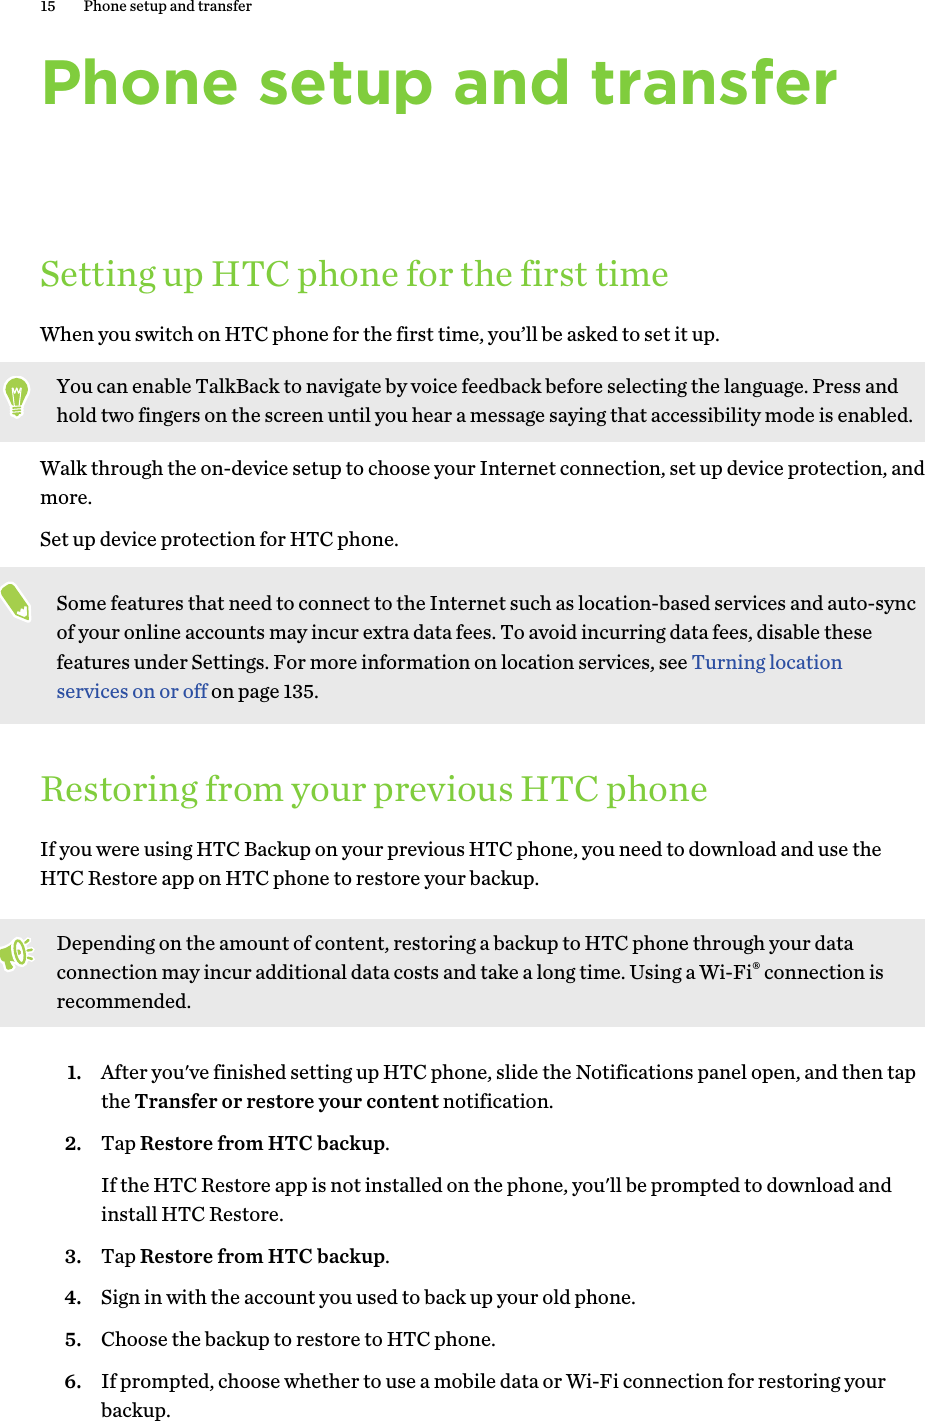 Phone setup and transferSetting up HTC phone for the first timeWhen you switch on HTC phone for the first time, you’ll be asked to set it up.You can enable TalkBack to navigate by voice feedback before selecting the language. Press andhold two fingers on the screen until you hear a message saying that accessibility mode is enabled.Walk through the on-device setup to choose your Internet connection, set up device protection, andmore.Set up device protection for HTC phone.Some features that need to connect to the Internet such as location-based services and auto-syncof your online accounts may incur extra data fees. To avoid incurring data fees, disable thesefeatures under Settings. For more information on location services, see Turning locationservices on or off on page 135.Restoring from your previous HTC phoneIf you were using HTC Backup on your previous HTC phone, you need to download and use theHTC Restore app on HTC phone to restore your backup.Depending on the amount of content, restoring a backup to HTC phone through your dataconnection may incur additional data costs and take a long time. Using a Wi-Fi® connection isrecommended.1. After you&apos;ve finished setting up HTC phone, slide the Notifications panel open, and then tapthe Transfer or restore your content notification.2. Tap Restore from HTC backup.If the HTC Restore app is not installed on the phone, you&apos;ll be prompted to download andinstall HTC Restore.3. Tap Restore from HTC backup.4. Sign in with the account you used to back up your old phone.5. Choose the backup to restore to HTC phone.6. If prompted, choose whether to use a mobile data or Wi-Fi connection for restoring yourbackup.15 Phone setup and transferHTC Confidenti For CertifHTC l 20160215 F   Only